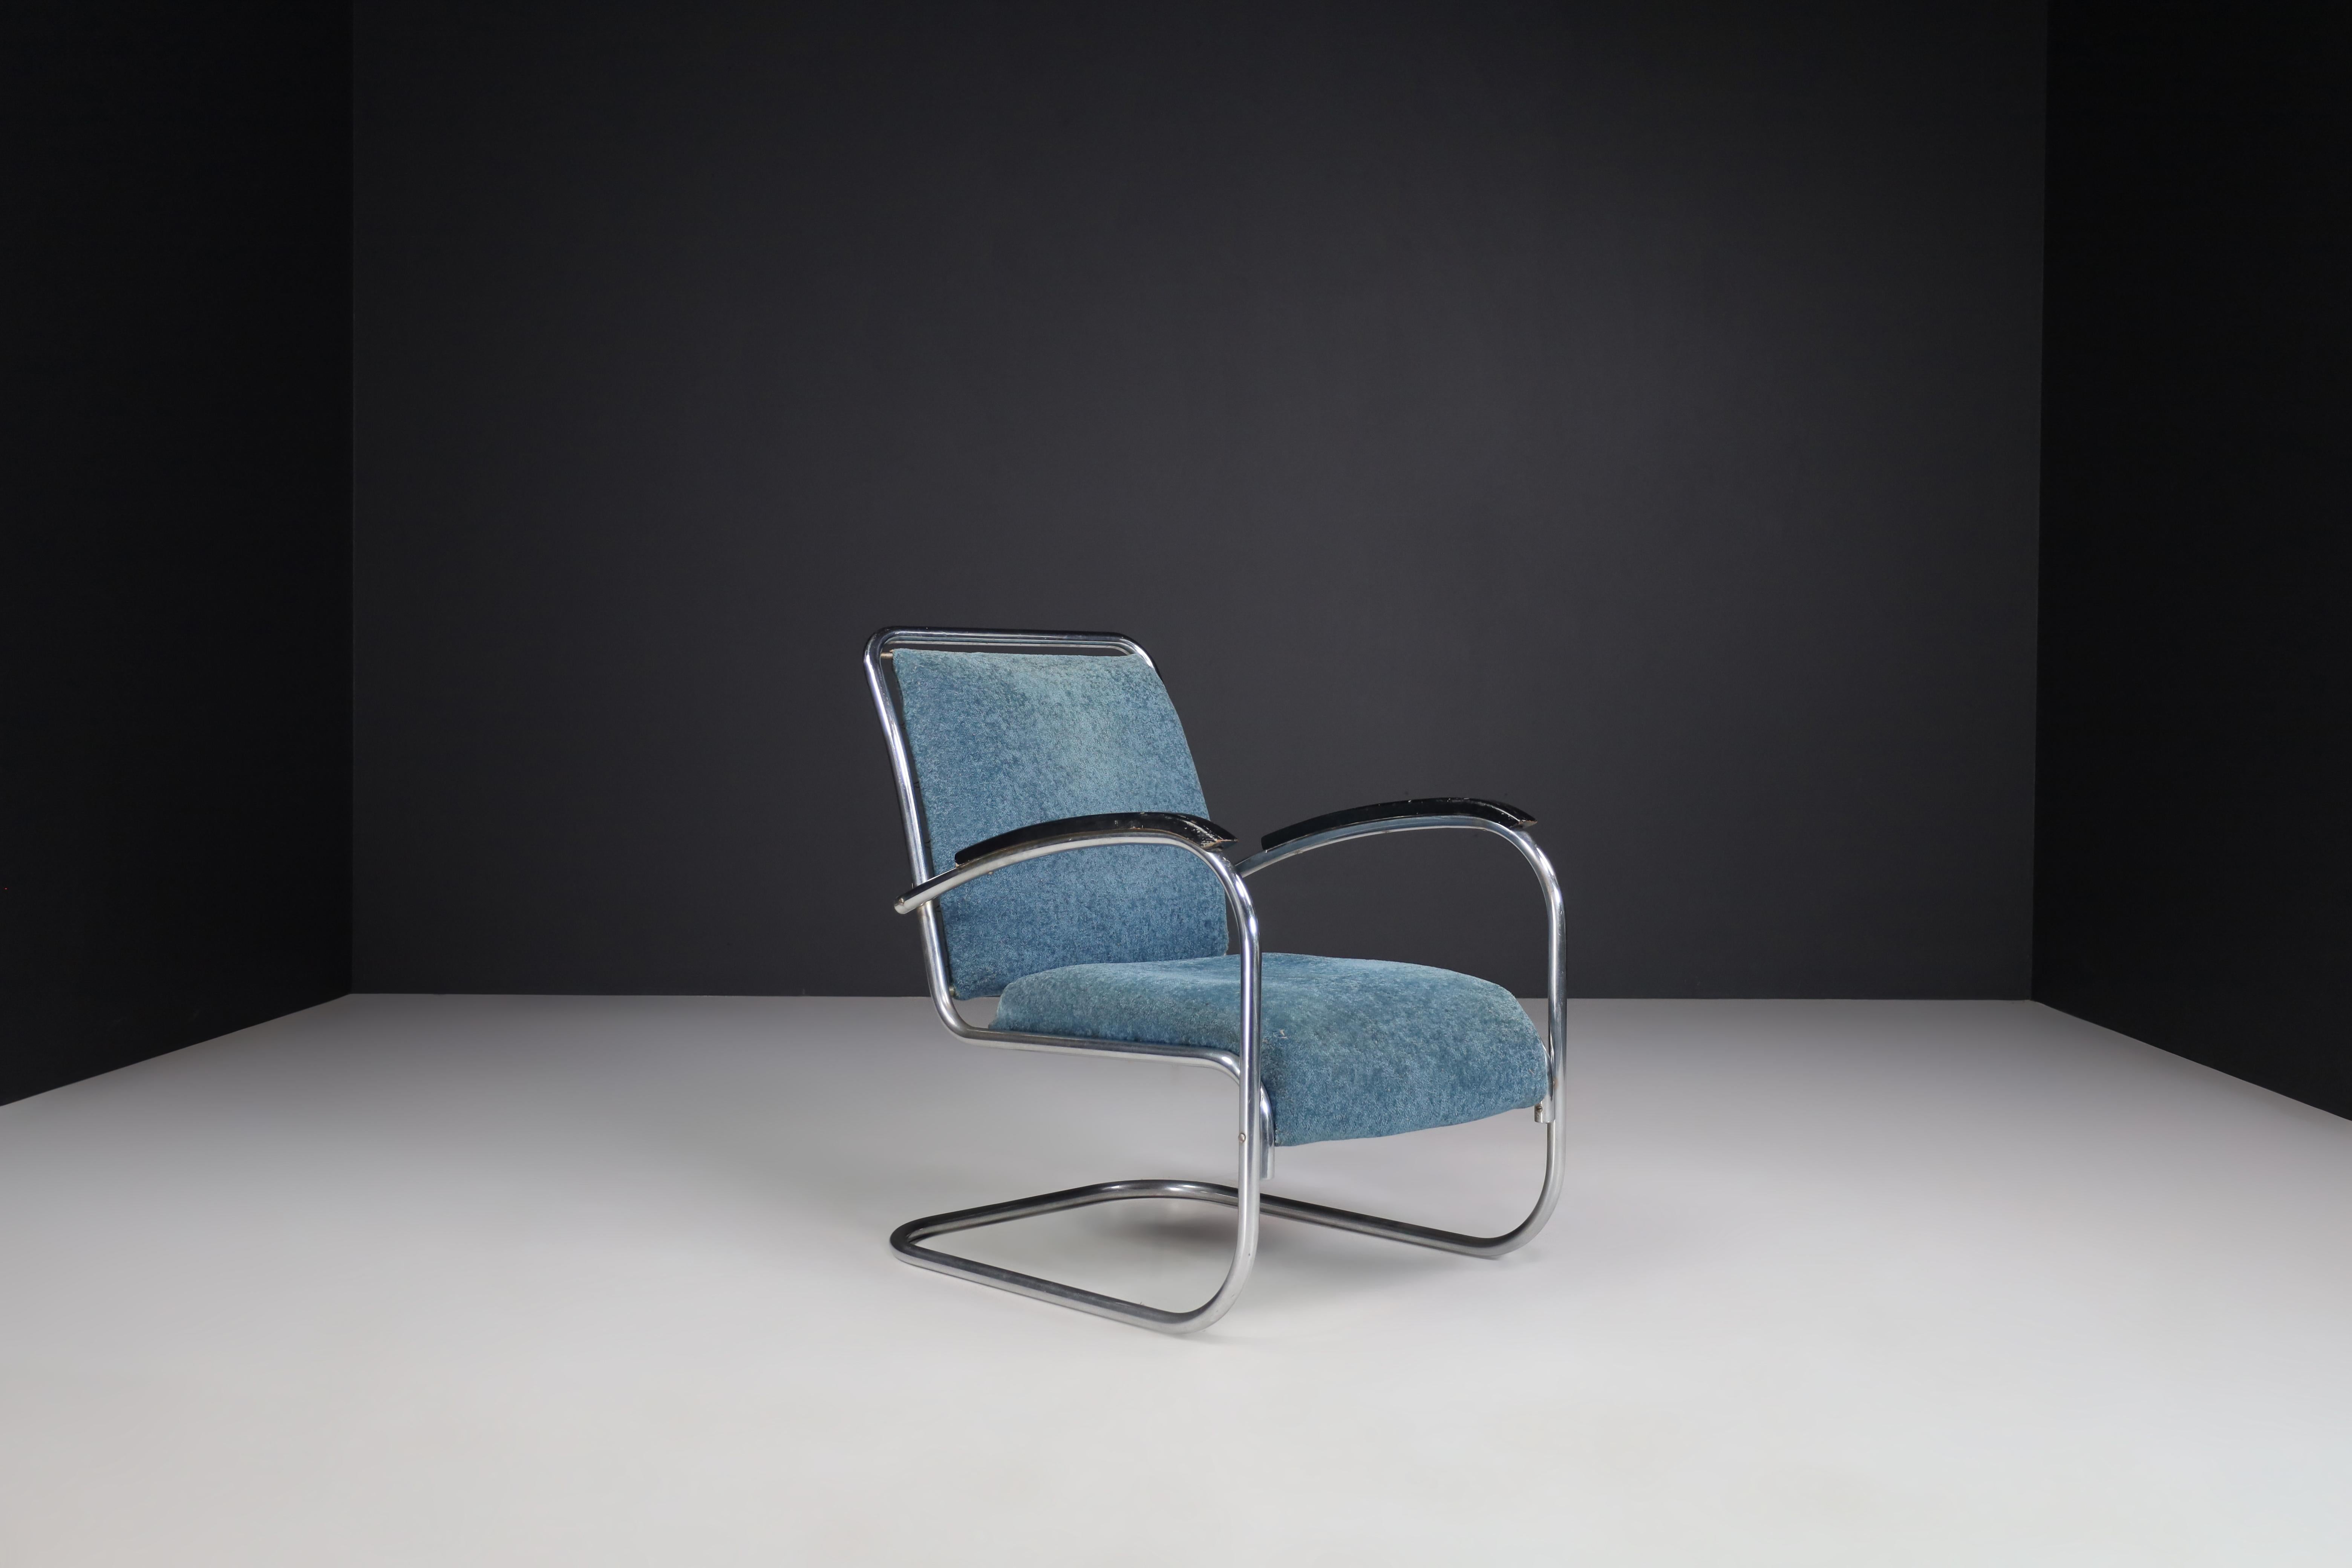 Bauhaus Cantilever lounge chair by Paul Schuitema, The Netherlands 1930s

In the 1930s, this cantilever tubular design was very modern, and due to that striking design, it still is modern – even in 2020. This is a beautifully aged original example